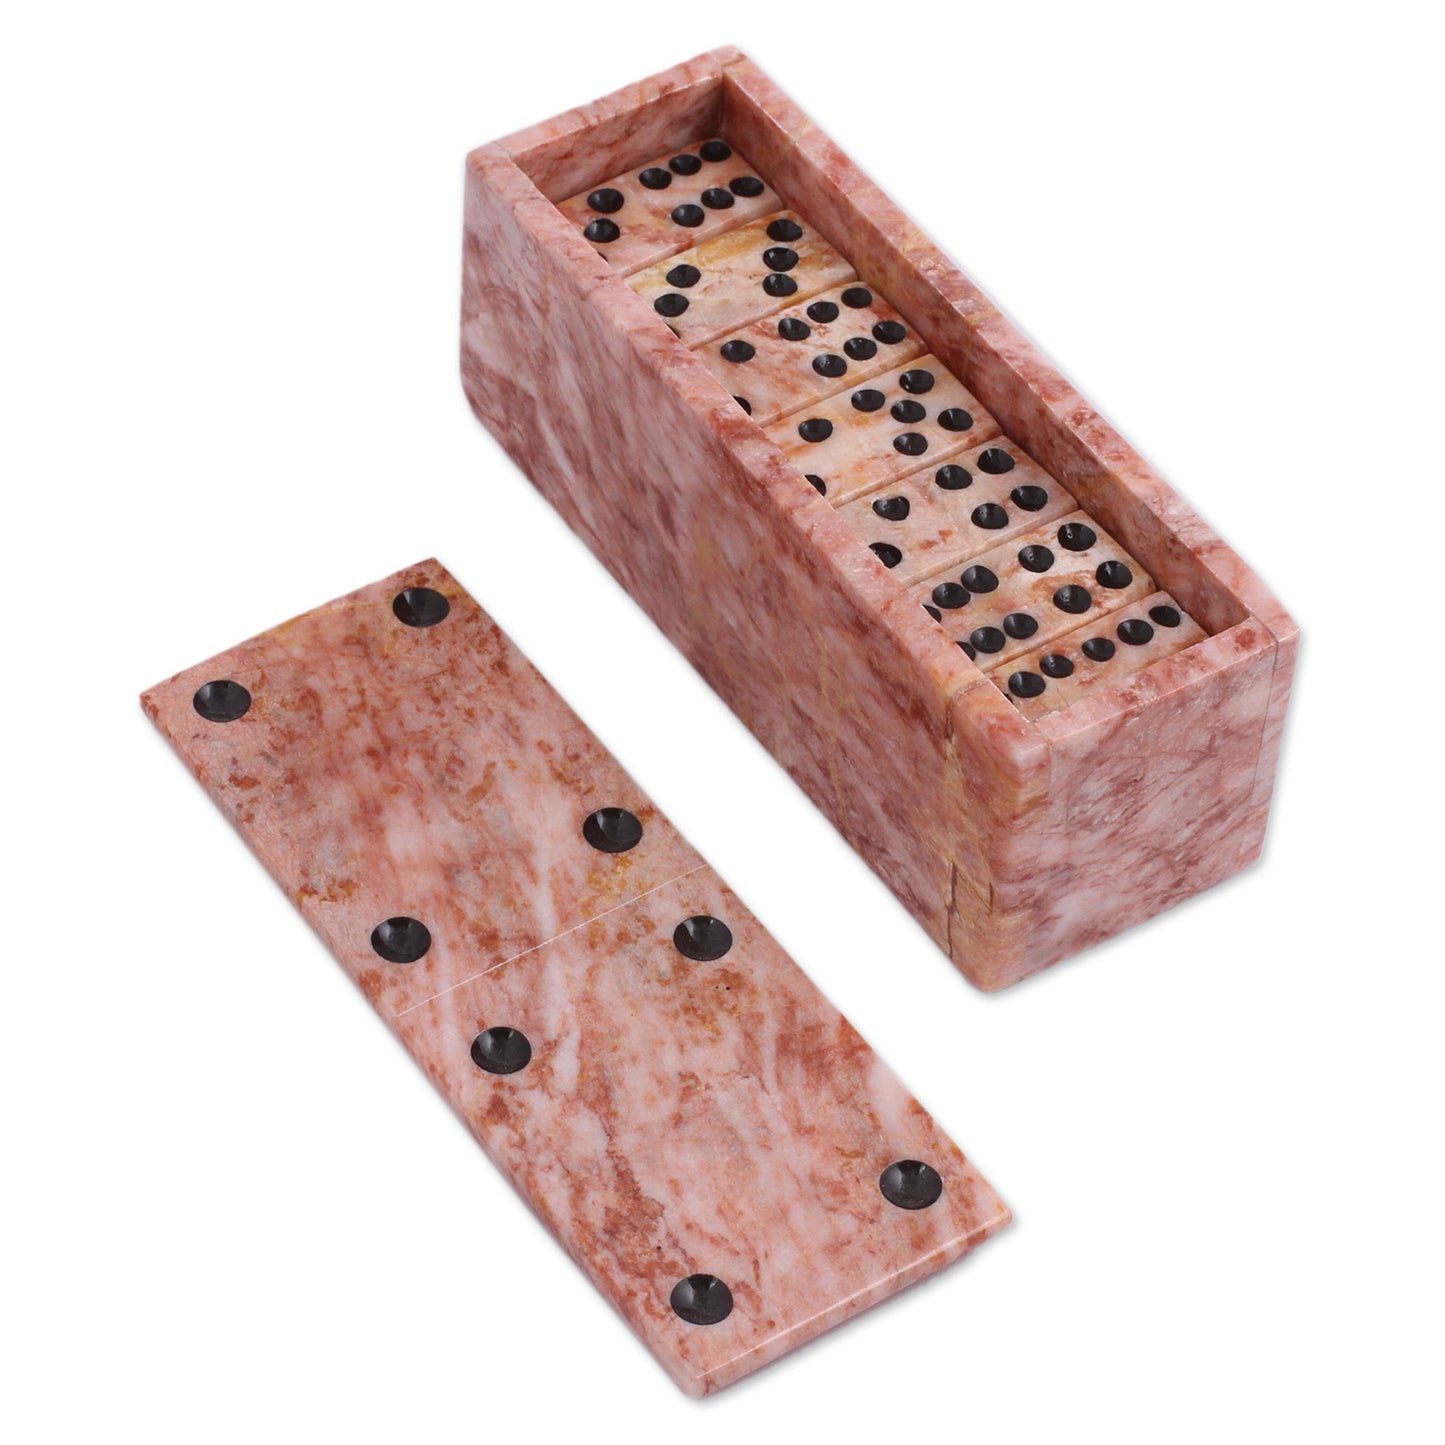 Victorious Chance Pink Marble Domino Set from Mexico (6 Inch)